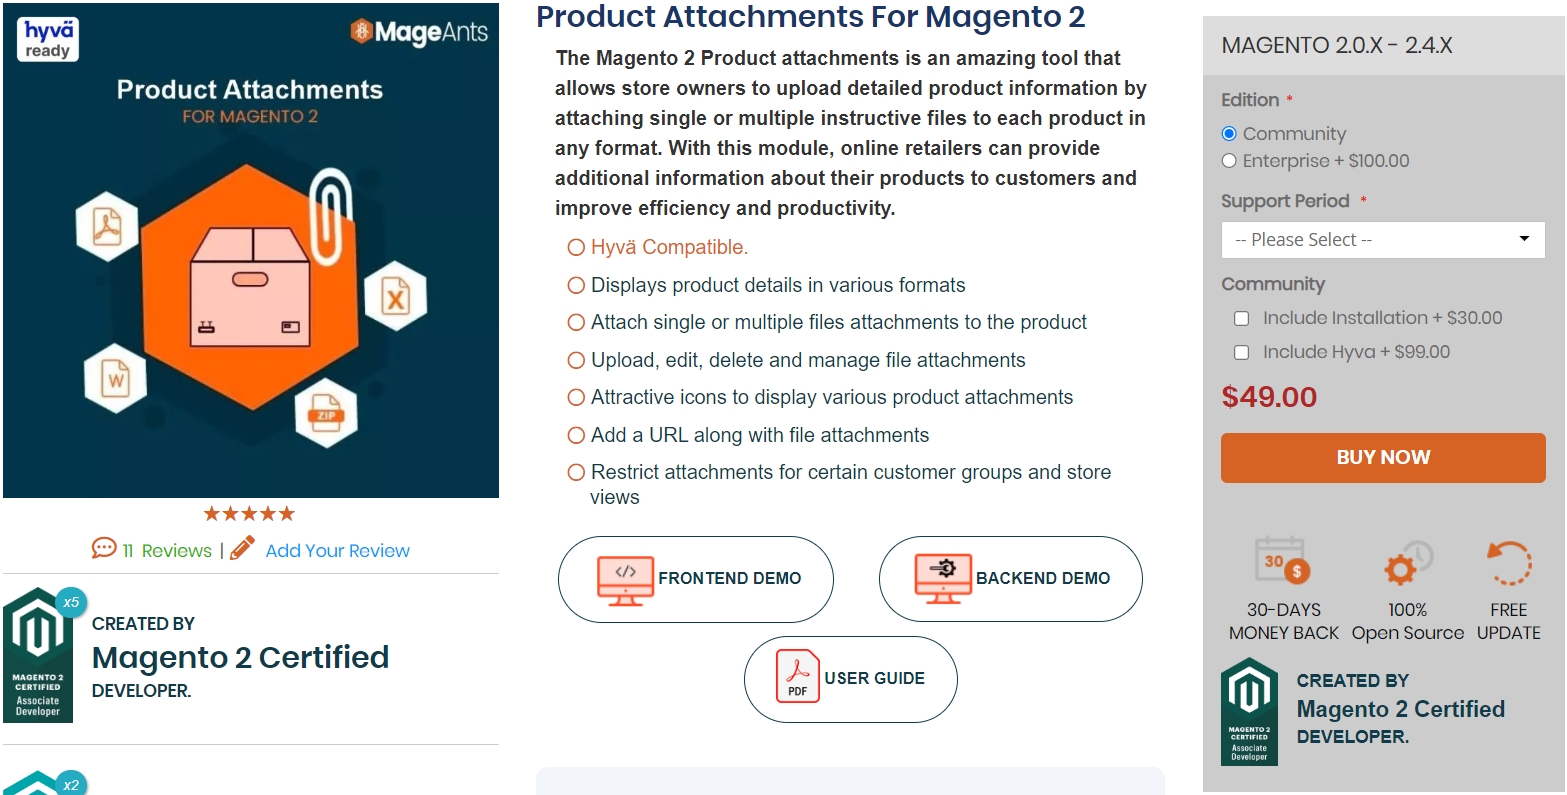 Product Attachments Magento 2 By mageants